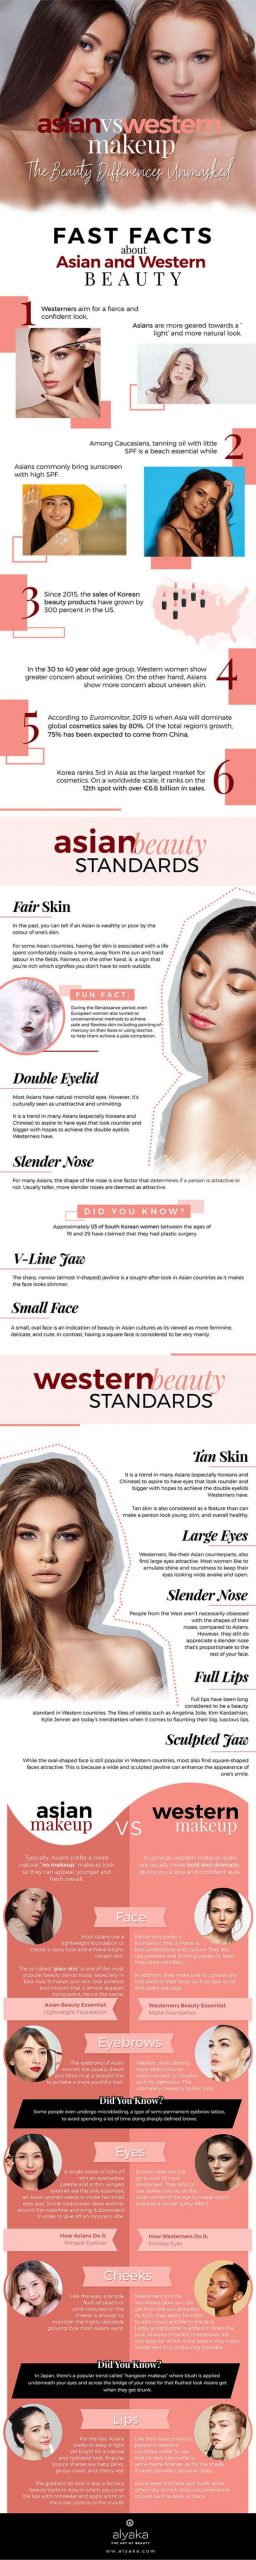 Differences-Between-Asian-And-Western-Makeup